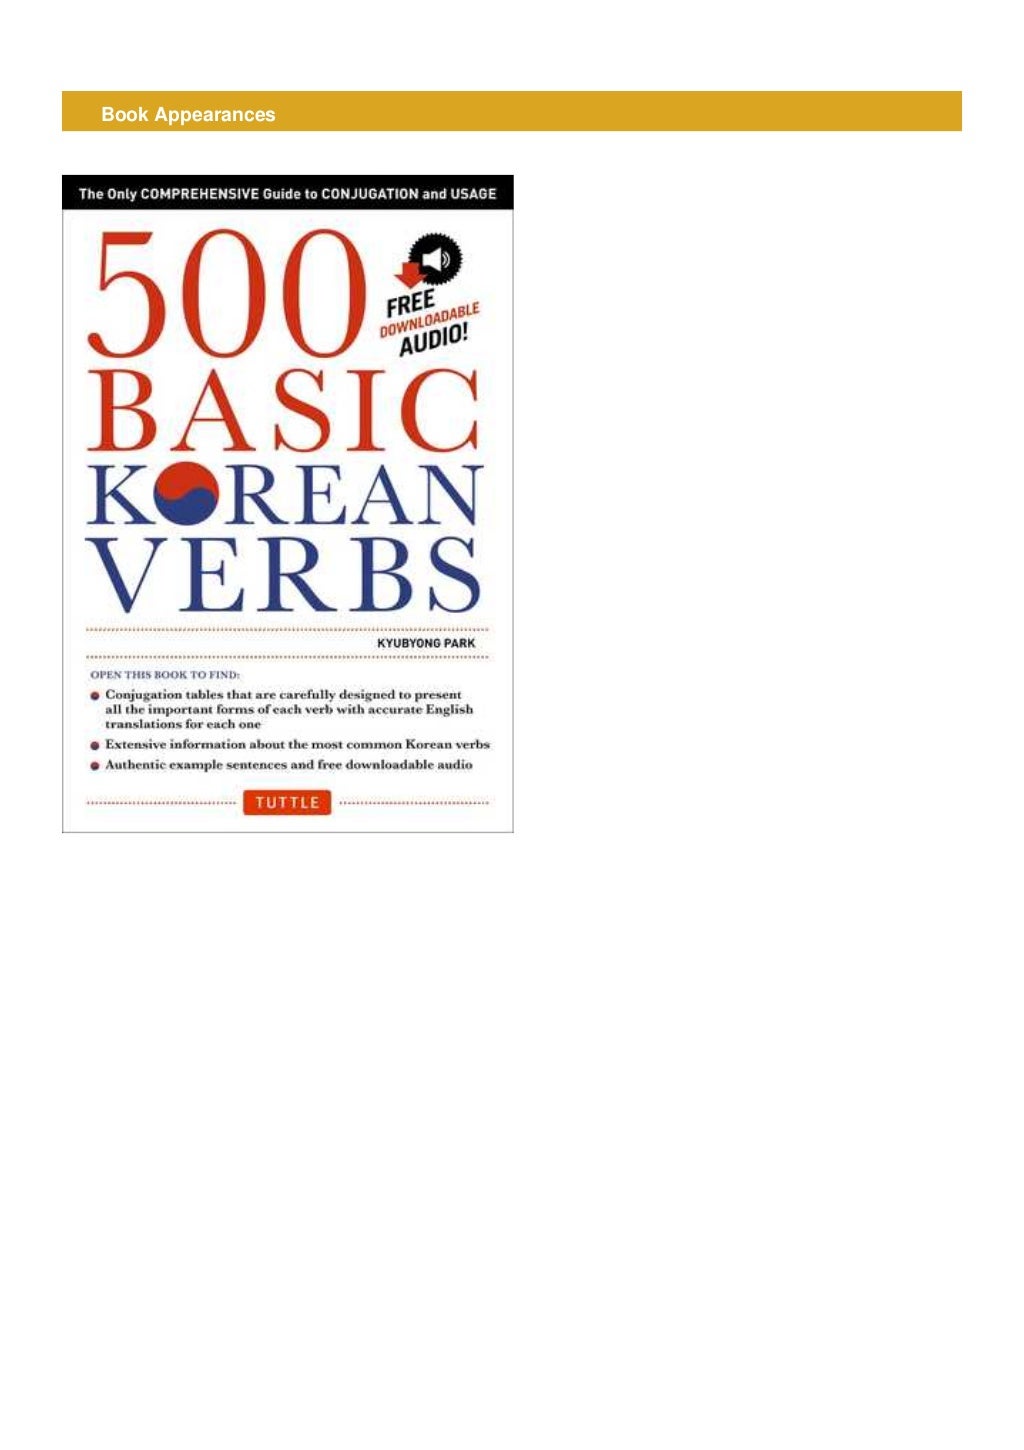  PDF free500 Basic Korean Verbs The Only Comprehensive Guide To Conjugation And Usage